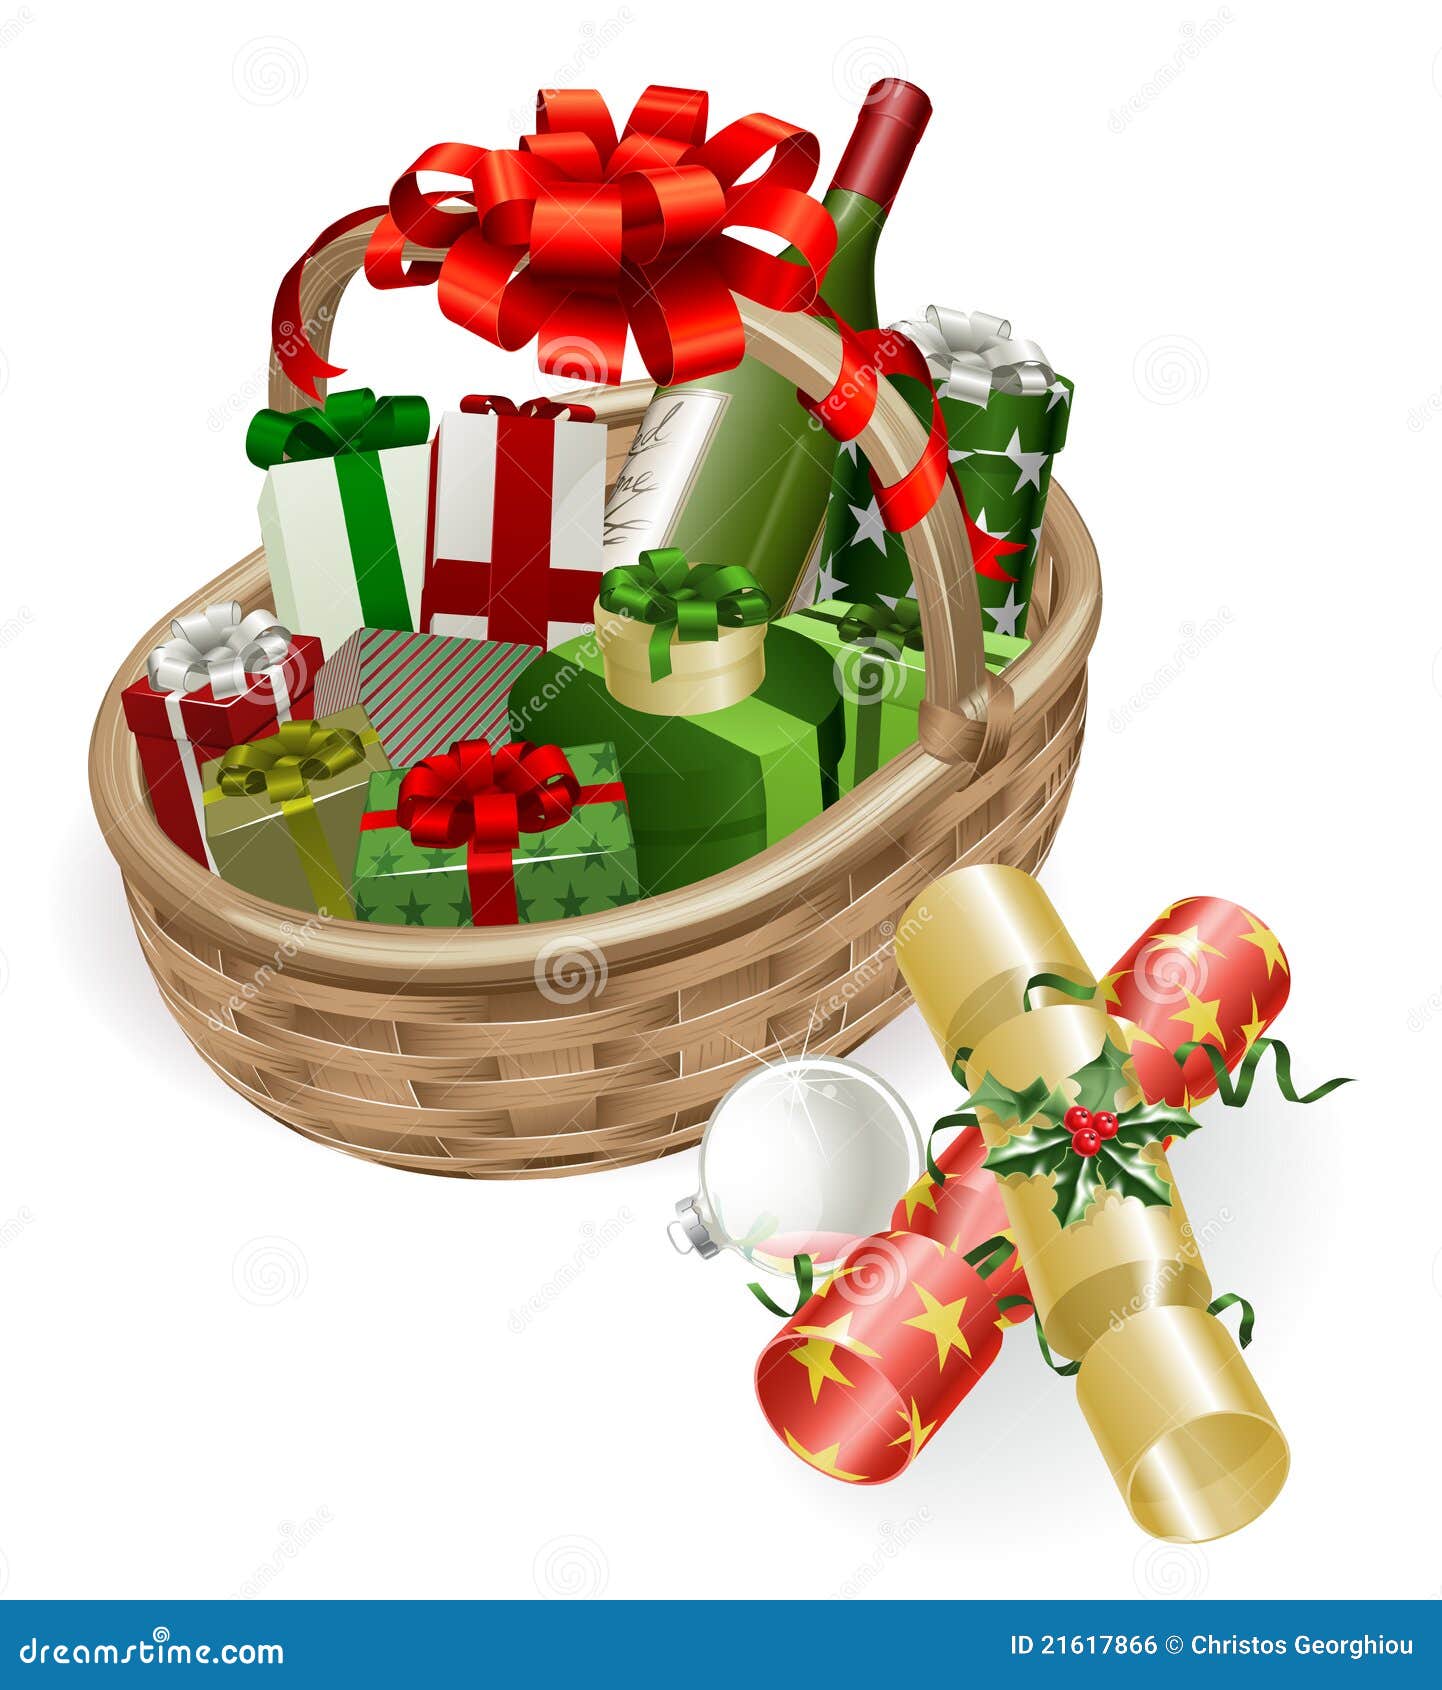 free clipart gift baskets - photo #45